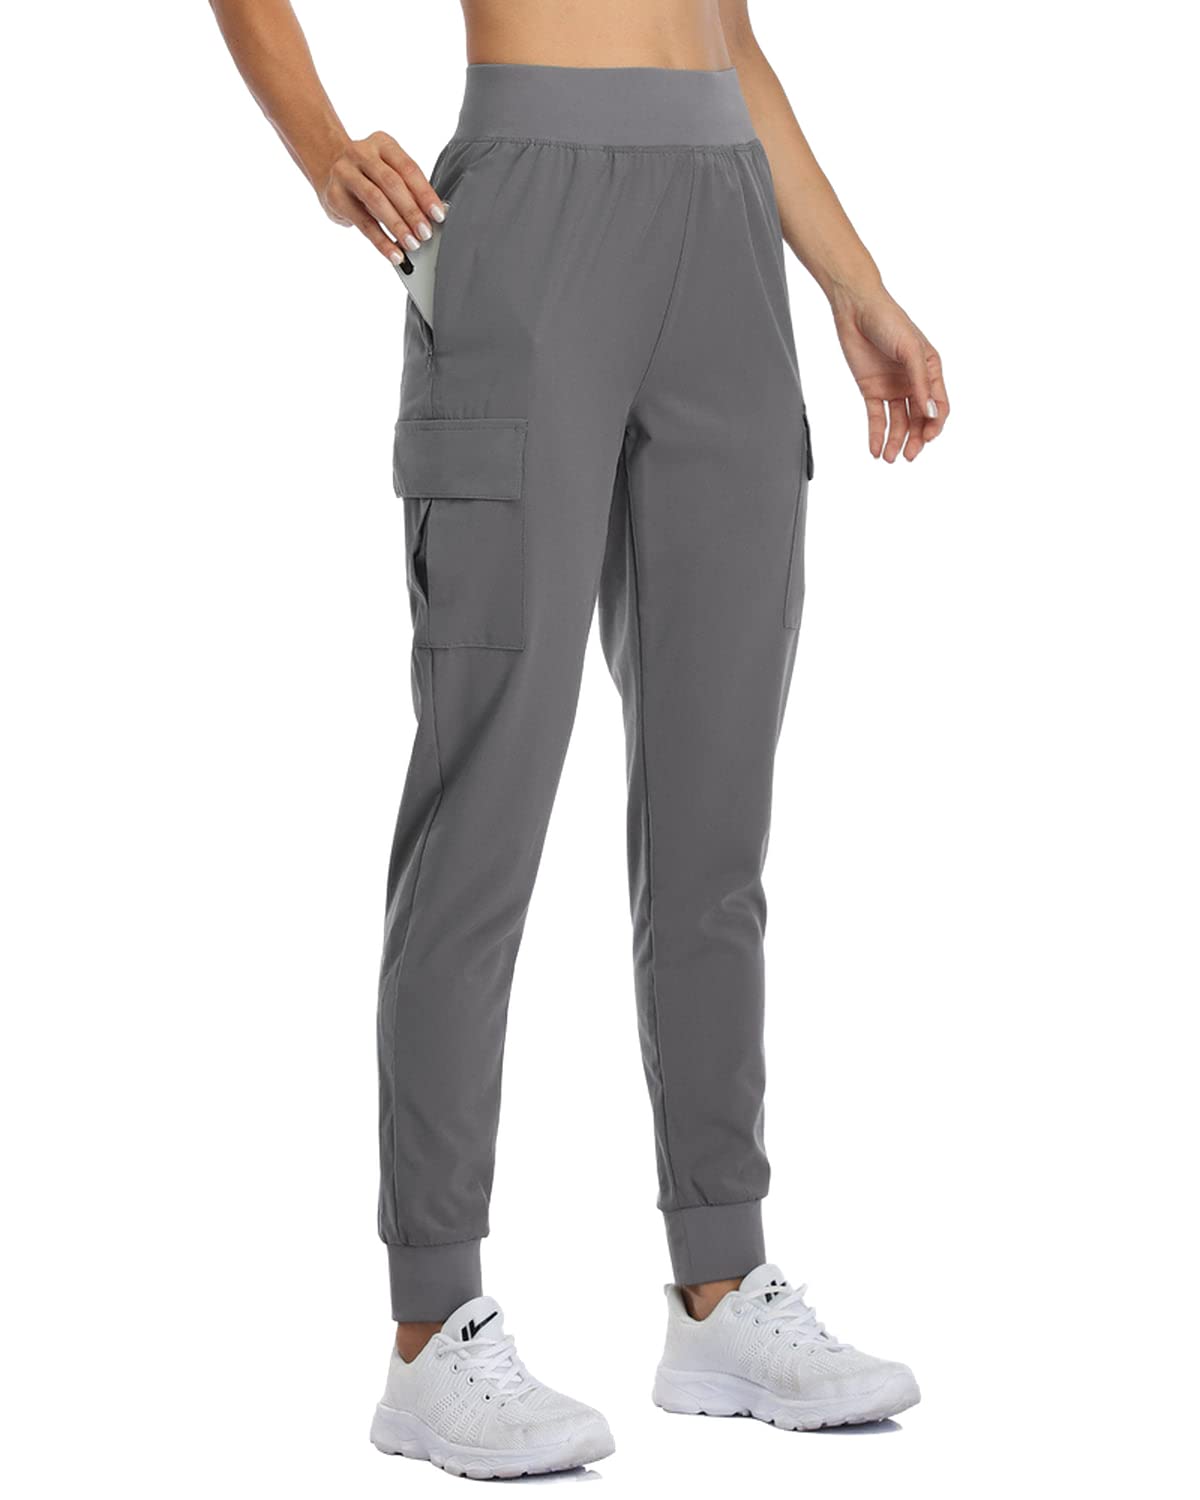 Willit Women's Cargo Joggers Lightweight Athletic Workout Pants Lounge Hiking Outdoor Pants with Pockets Quick Dry Gray M - Opticdeals